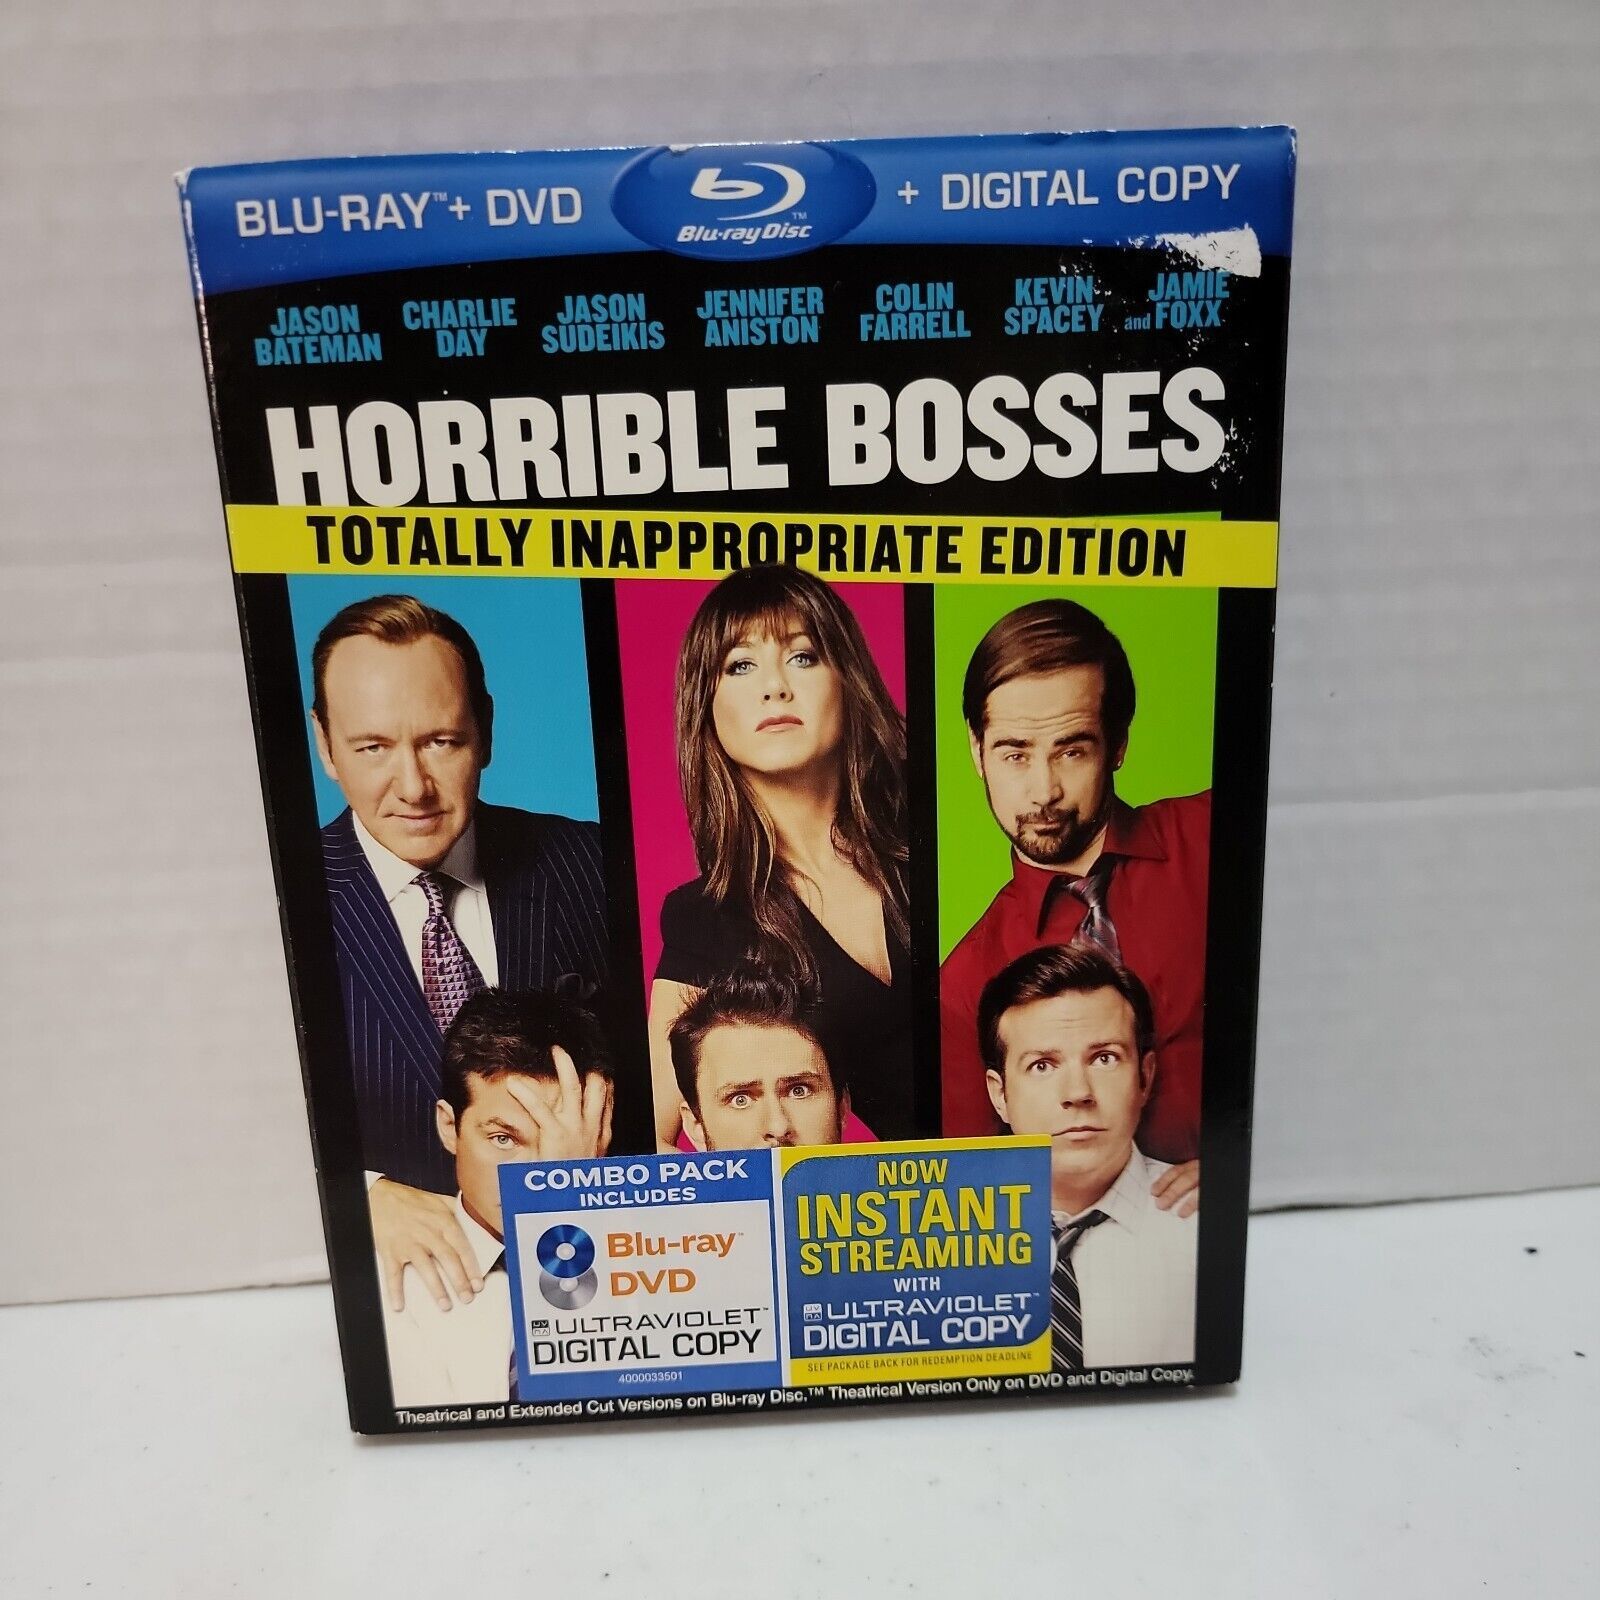 Primary image for Horrible Bosses (Blu-ray/DVD, 2011, 3-Disc Set, Totally Inappropriate Edition...